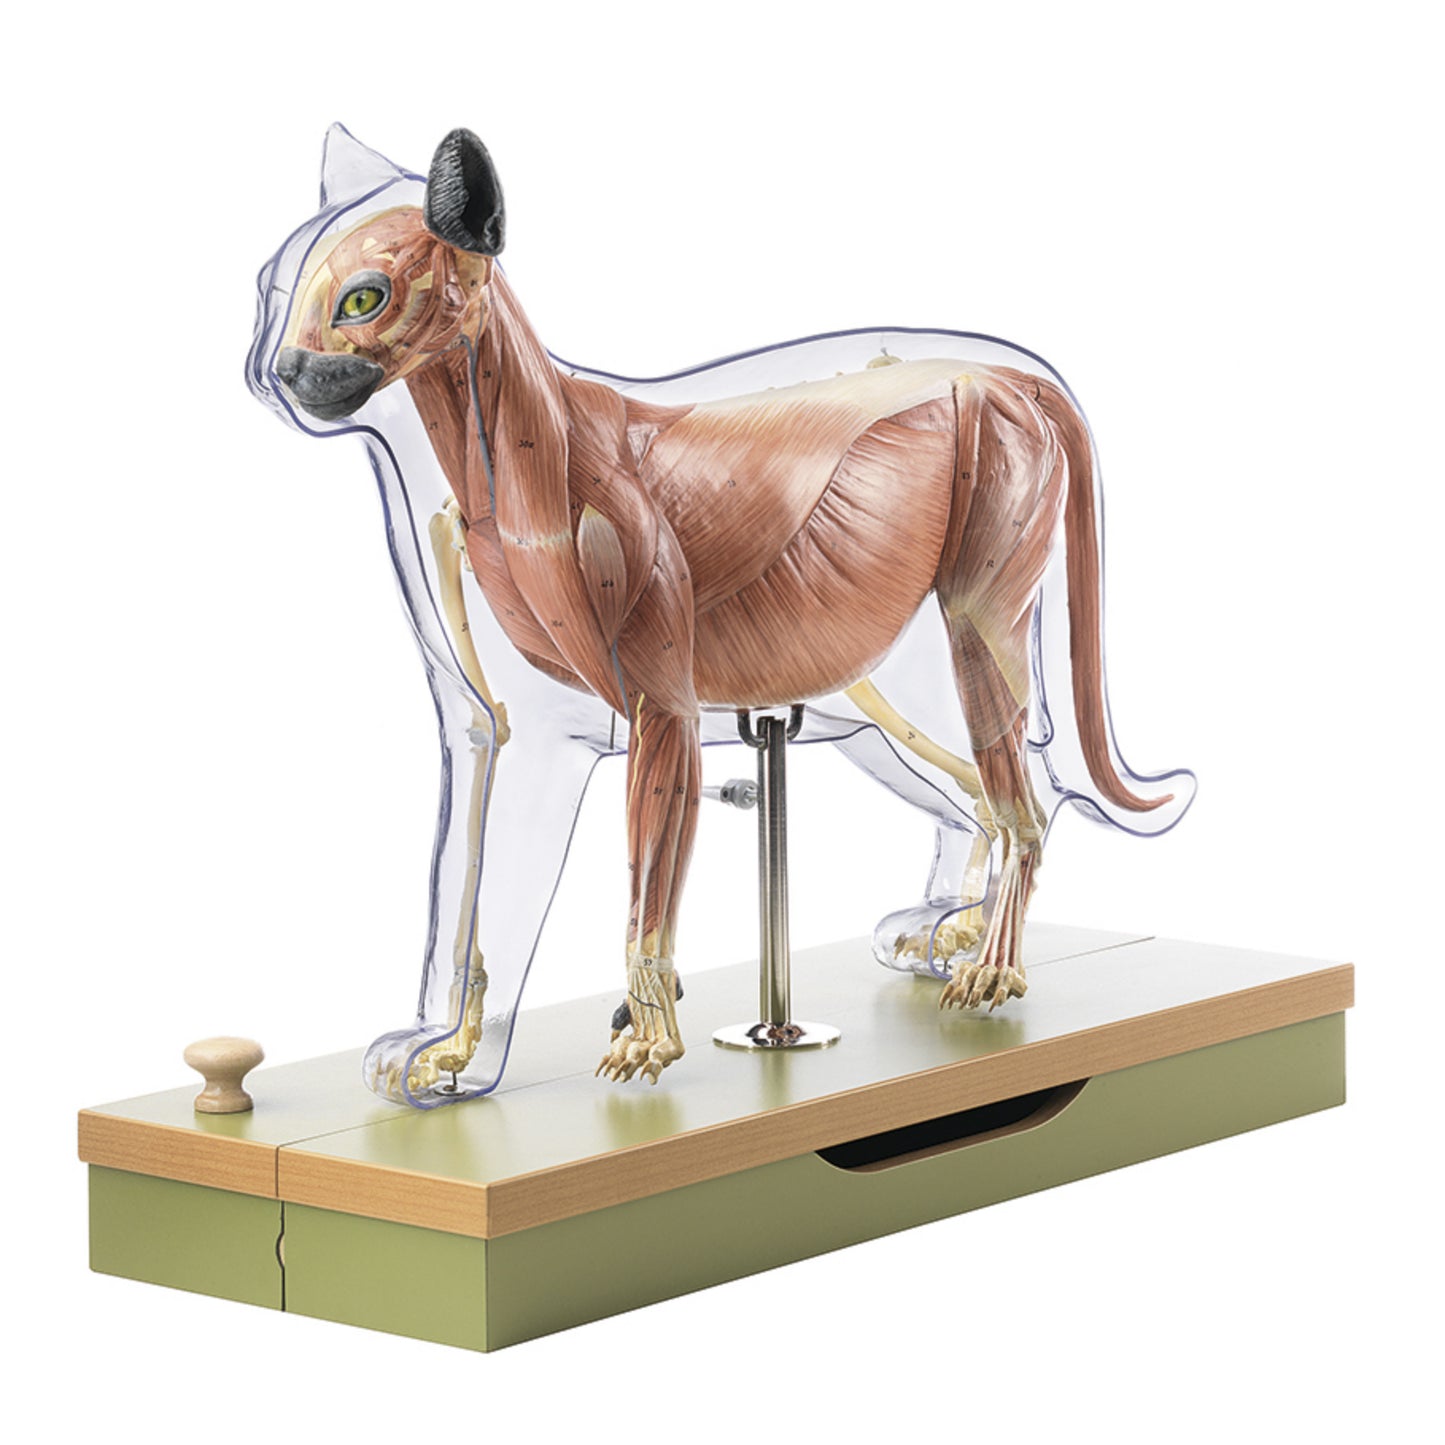 Anatomical model of a cat with musculature in 9 parts